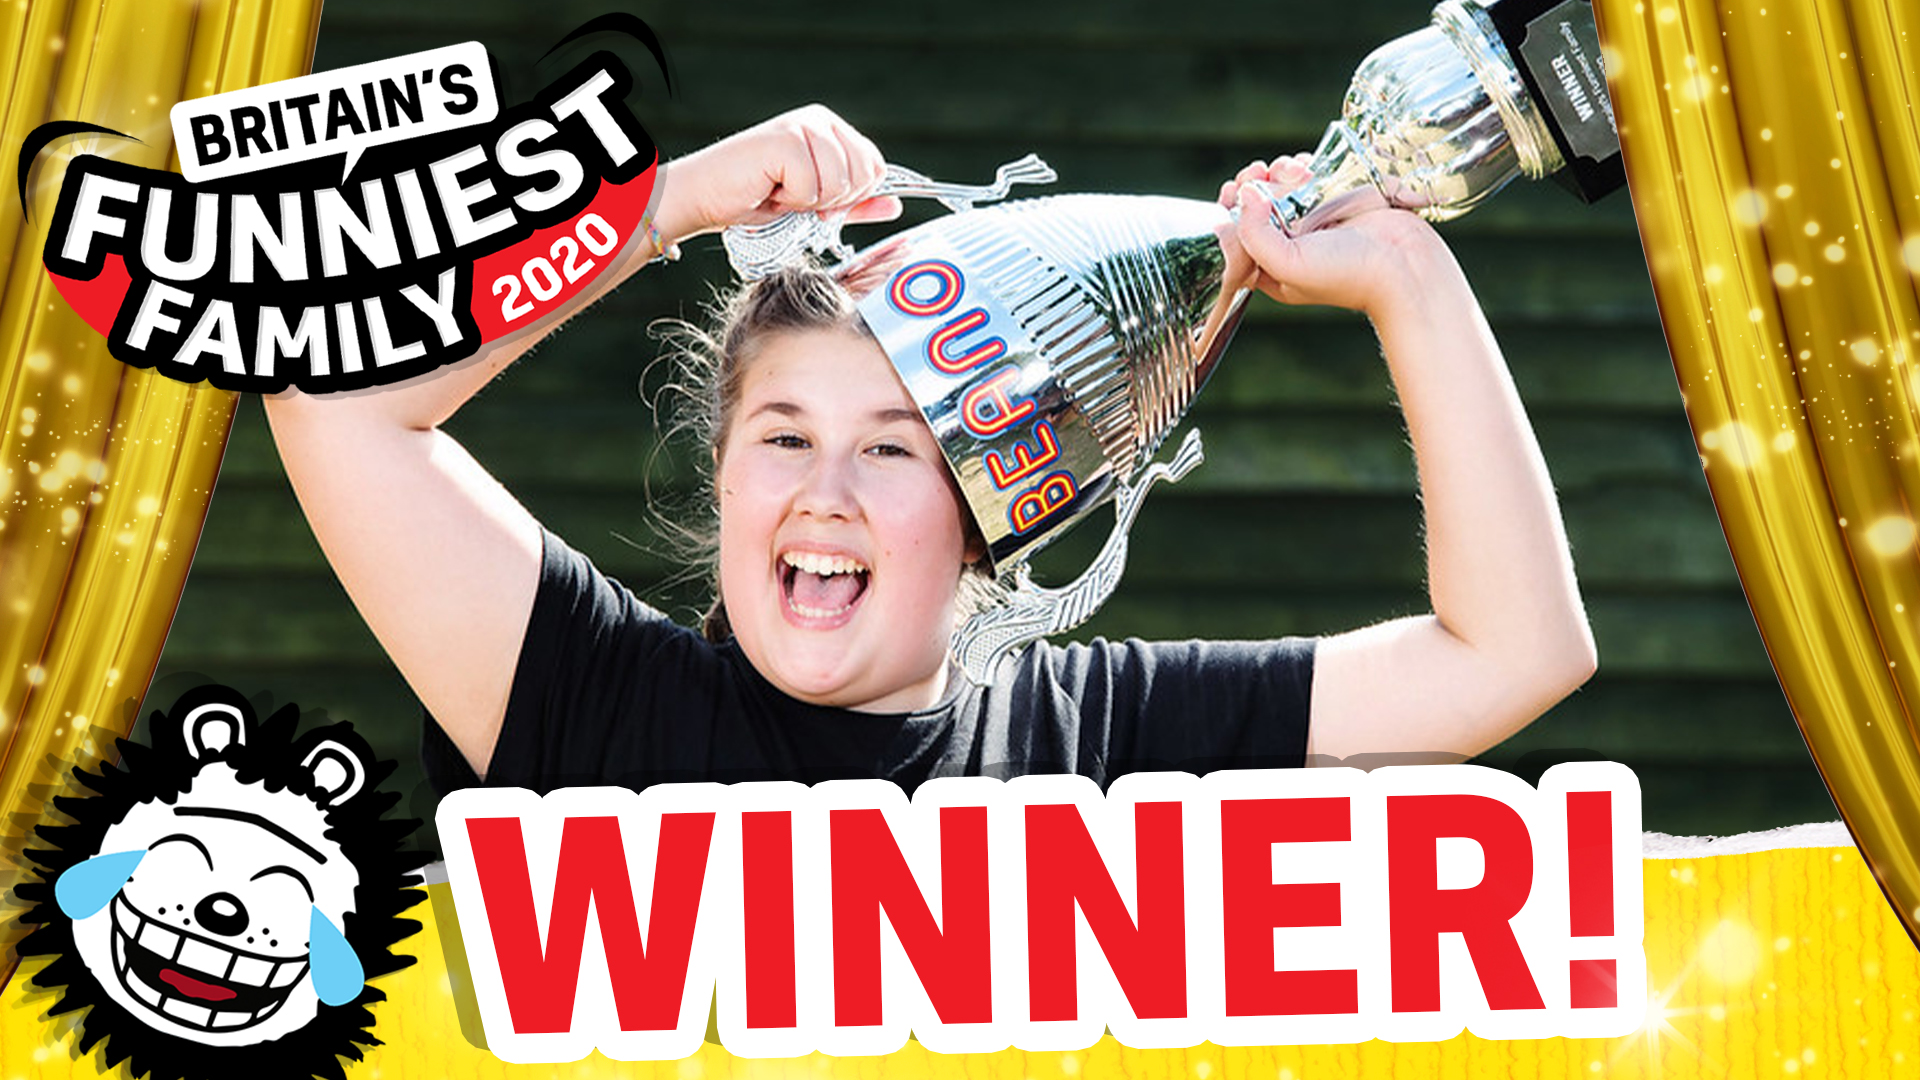 Britain's Funniest Family - Meet the Winners!